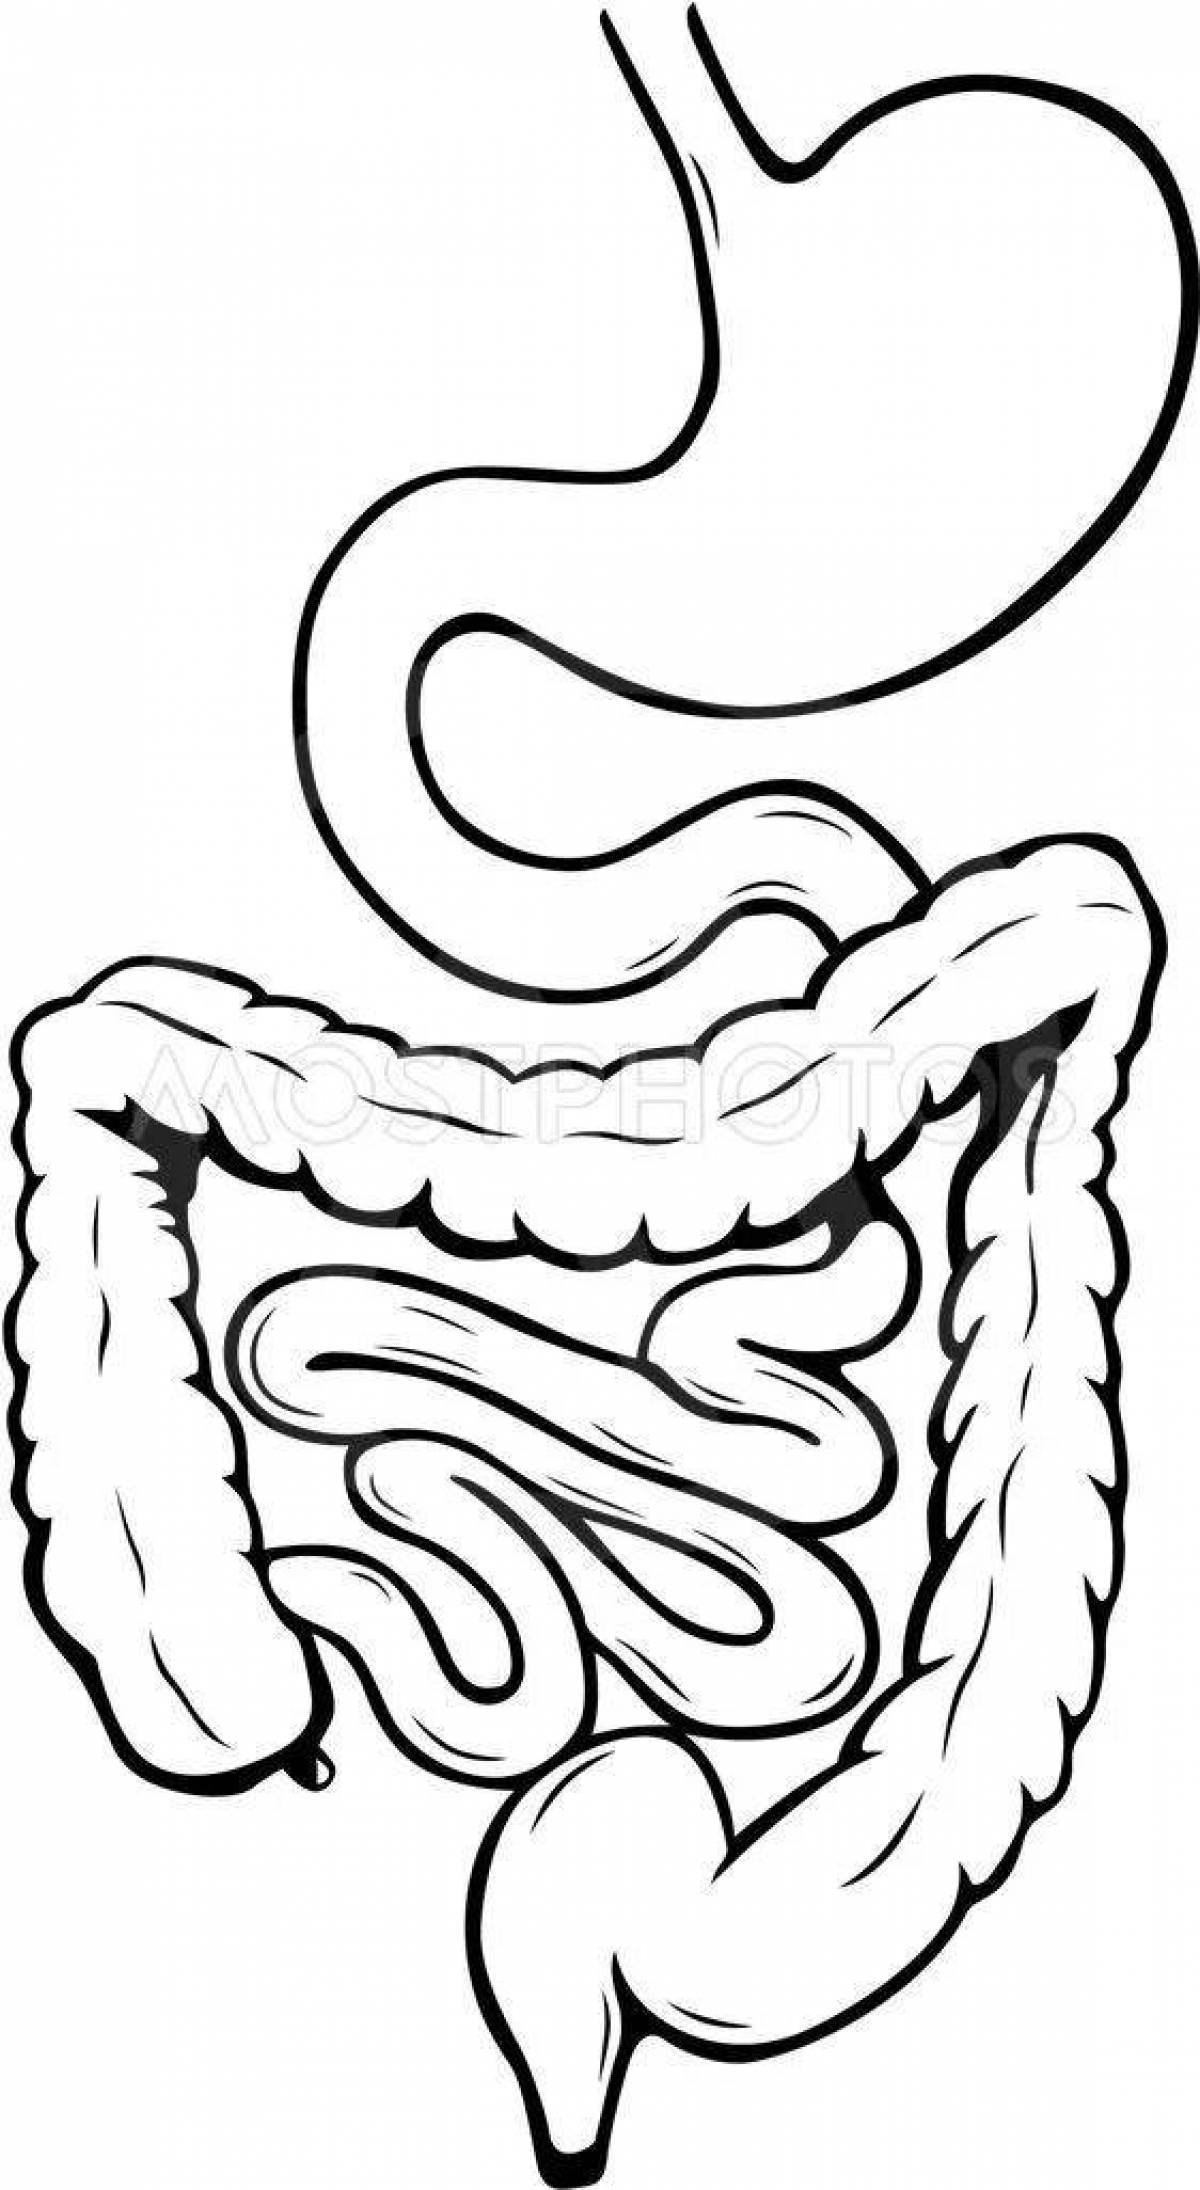 Large digestive system coloring page